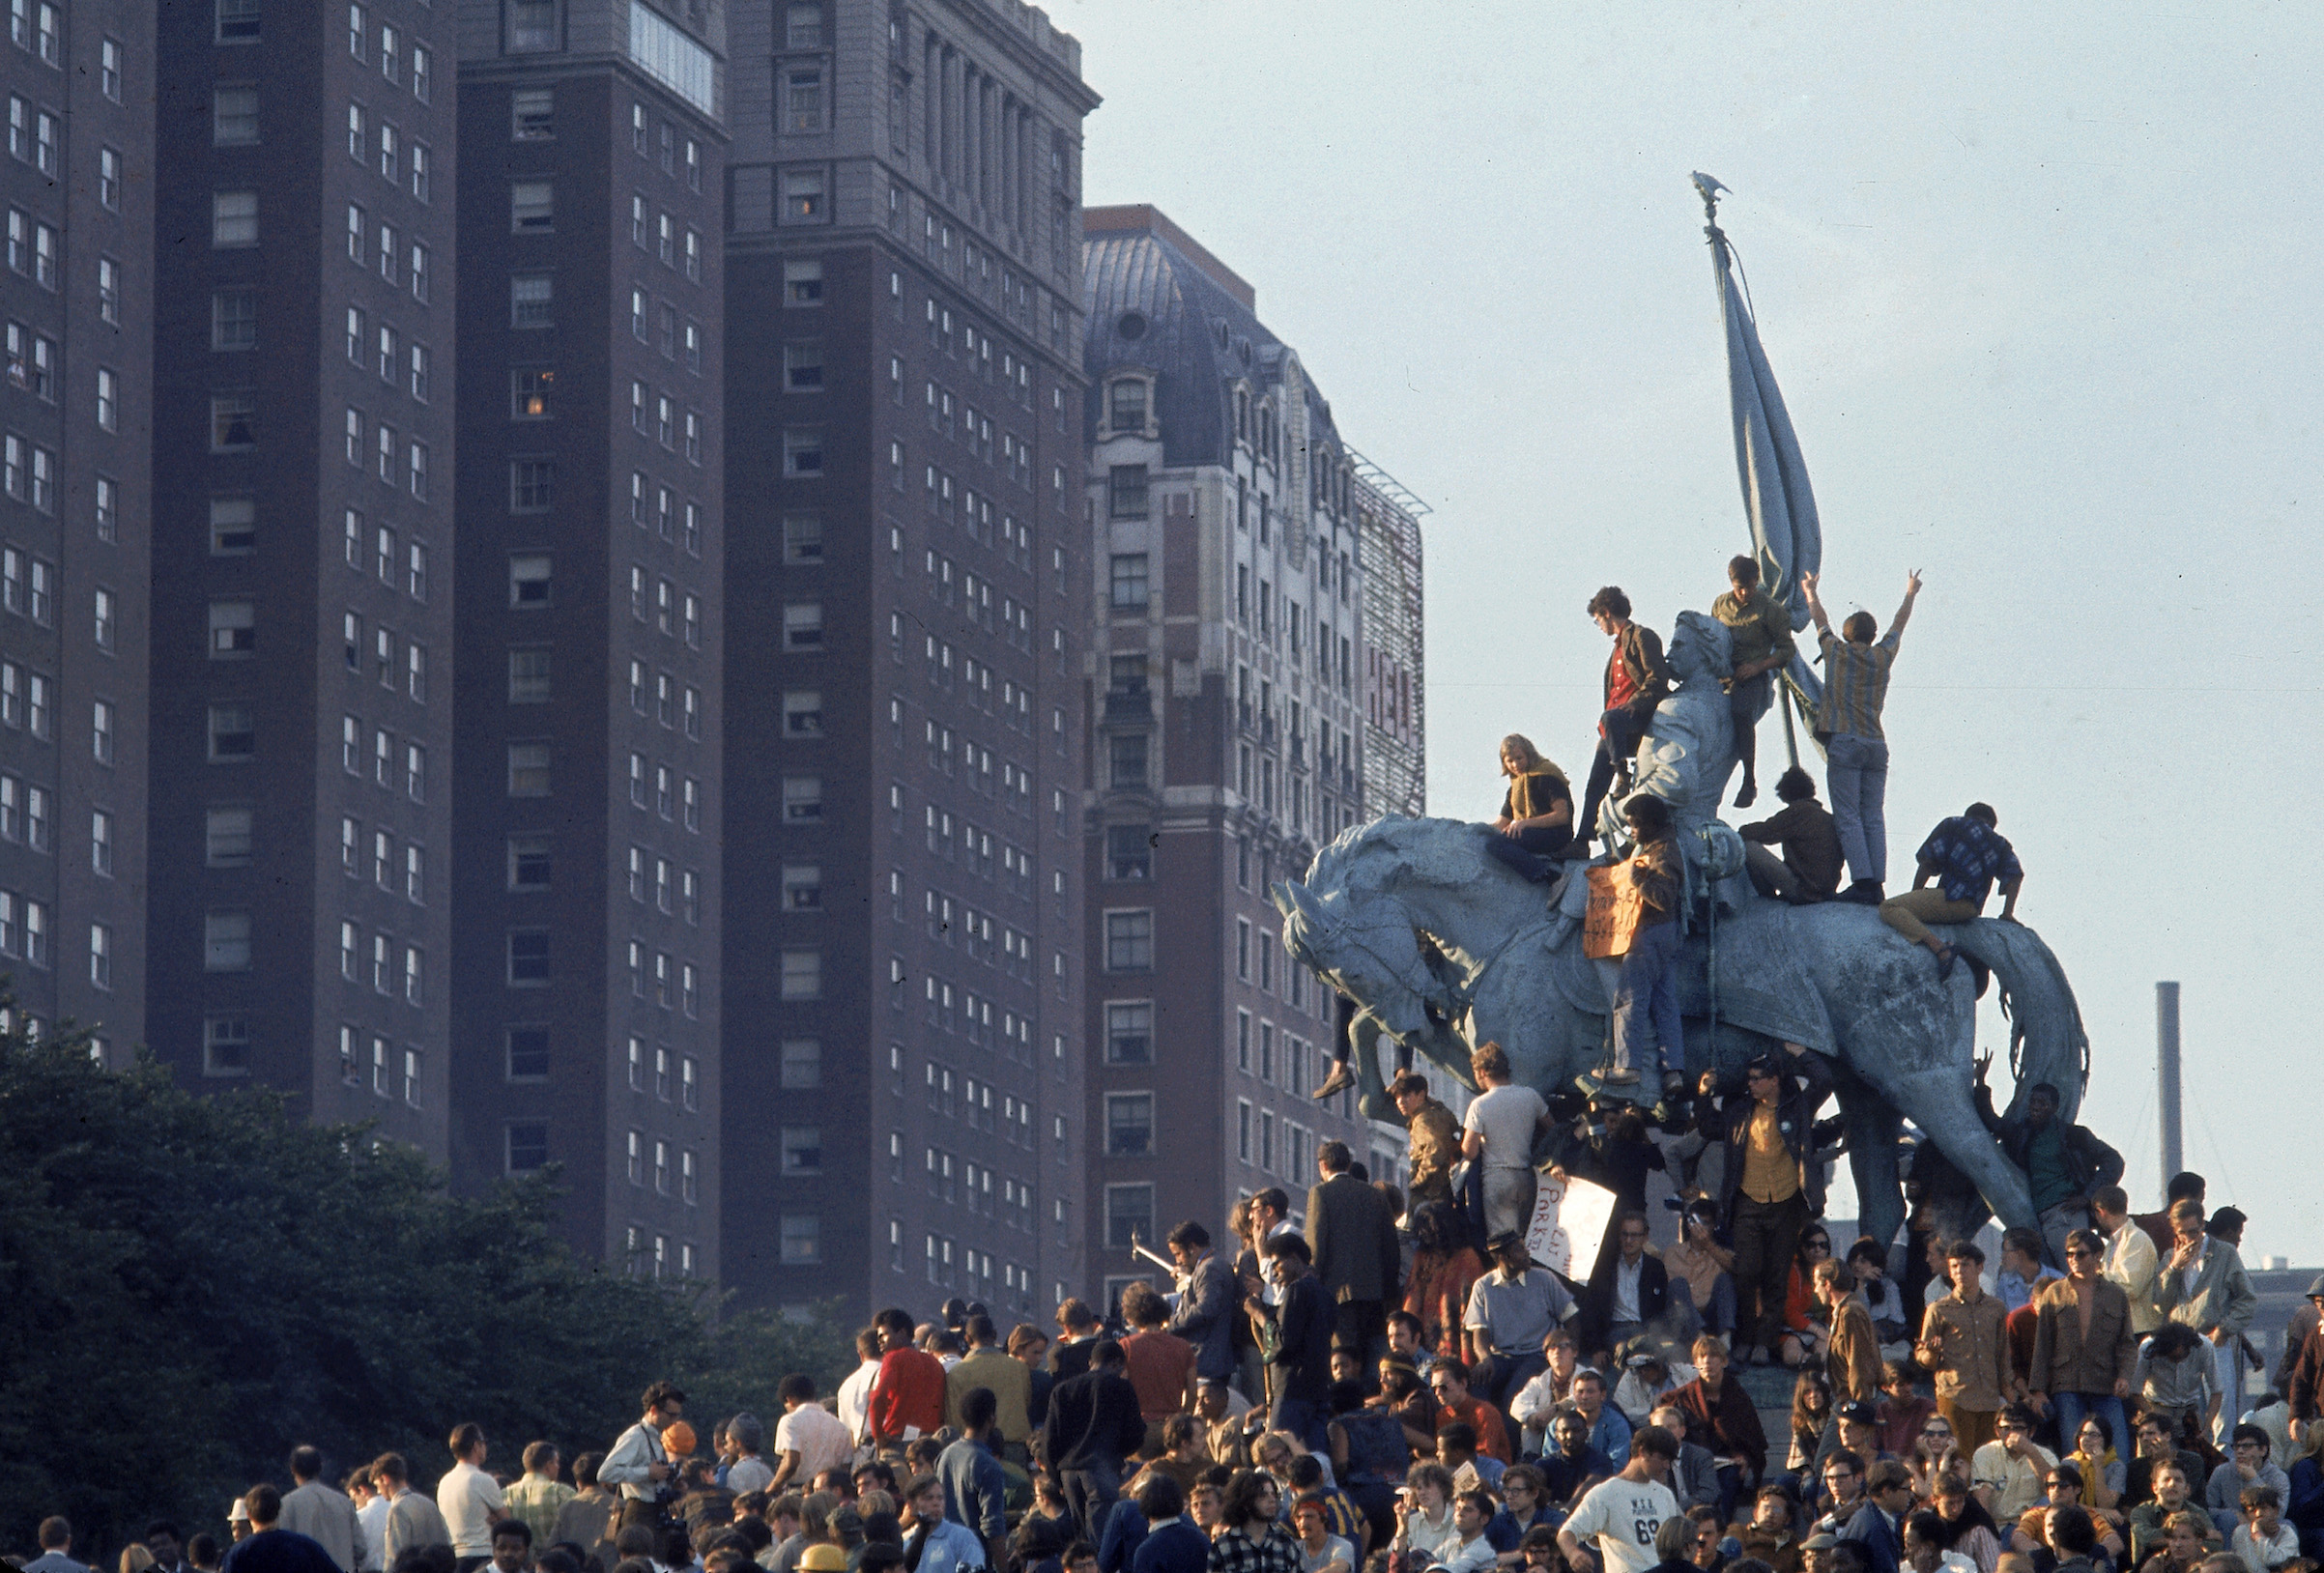 Yippie demonstrators swarming a statue in Grant Park during the 1968 Democratic National Convention. (Julian Wasser—The LIFE Images Collection/Getty Images)